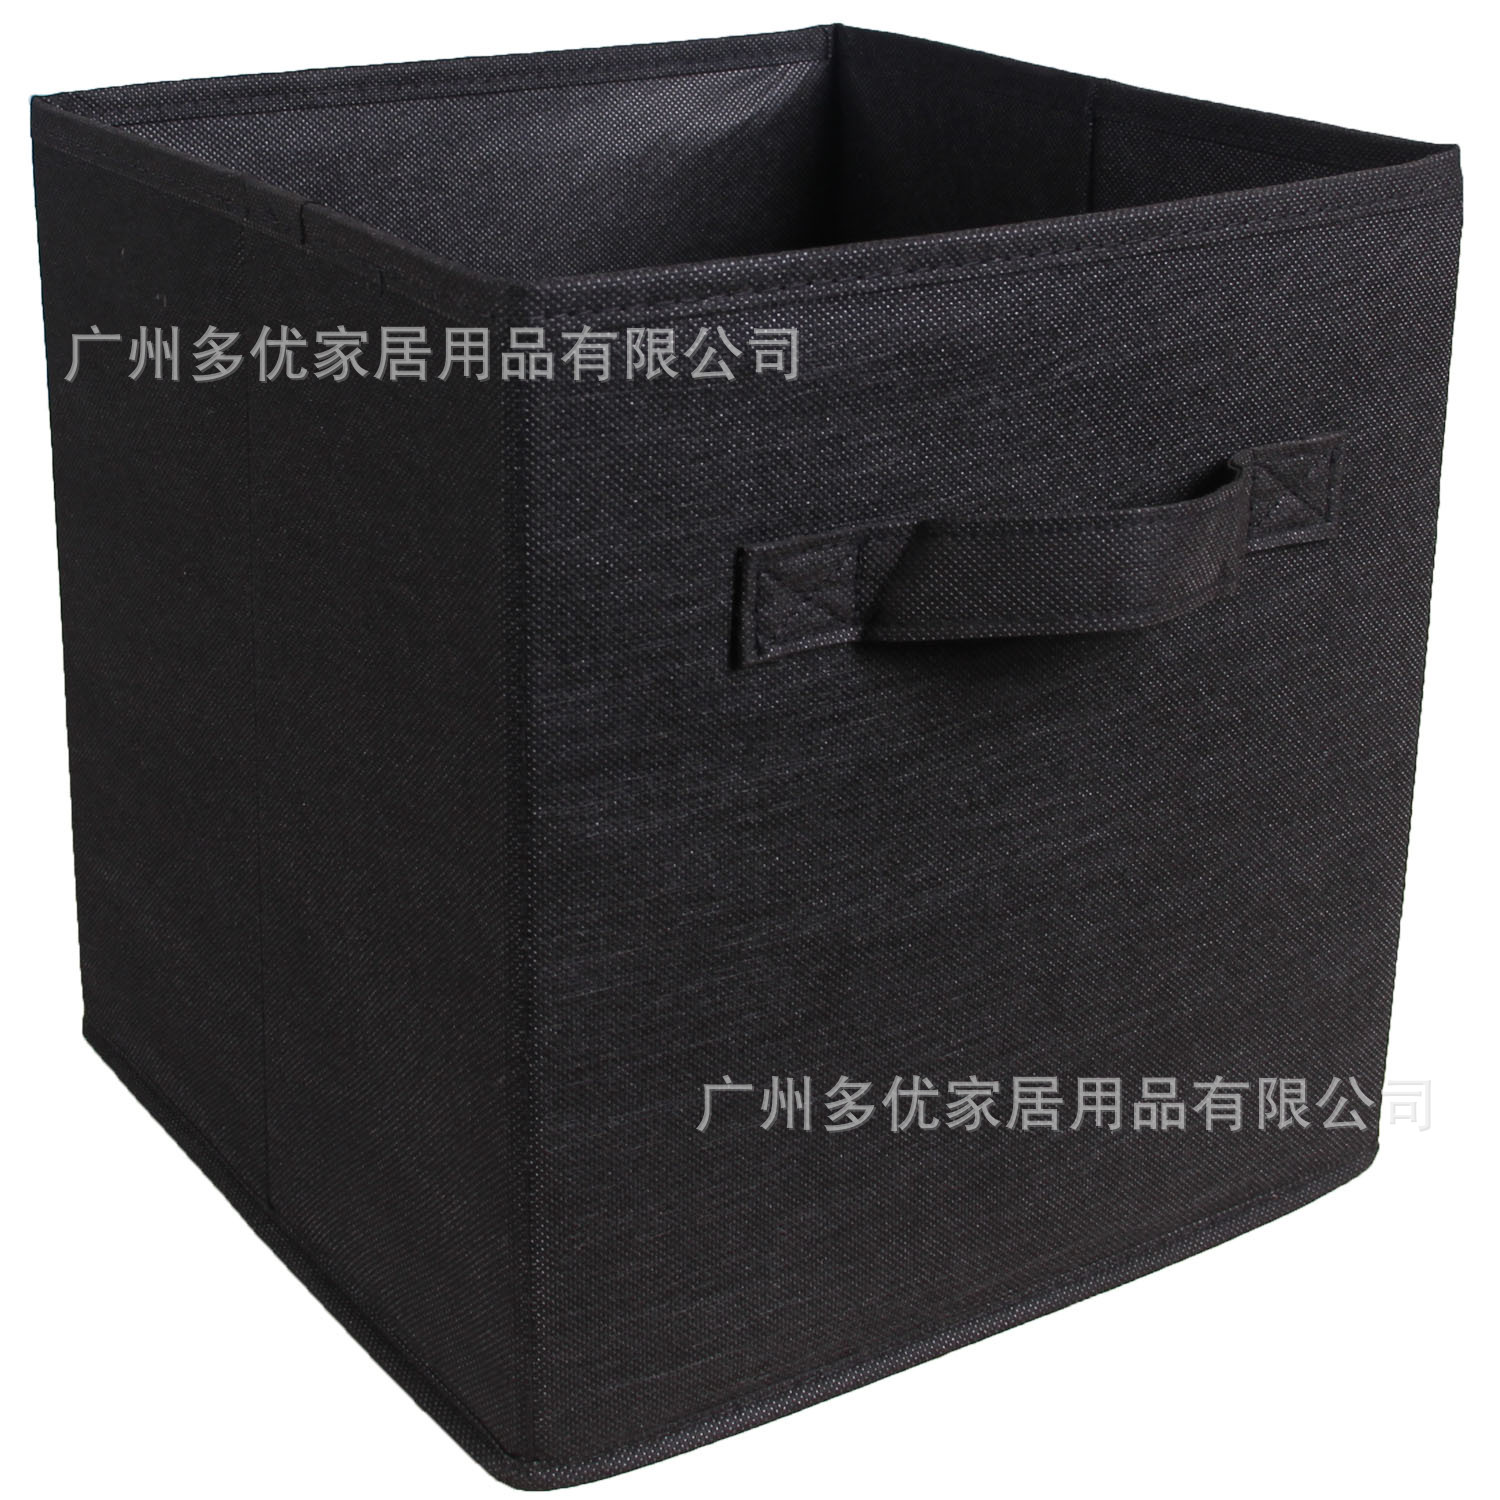 Non-Woven Fabric Storage Box Wholesale Portable Fabric Storage Box without Lid Household Clothes Toy Finishing Box Amazon